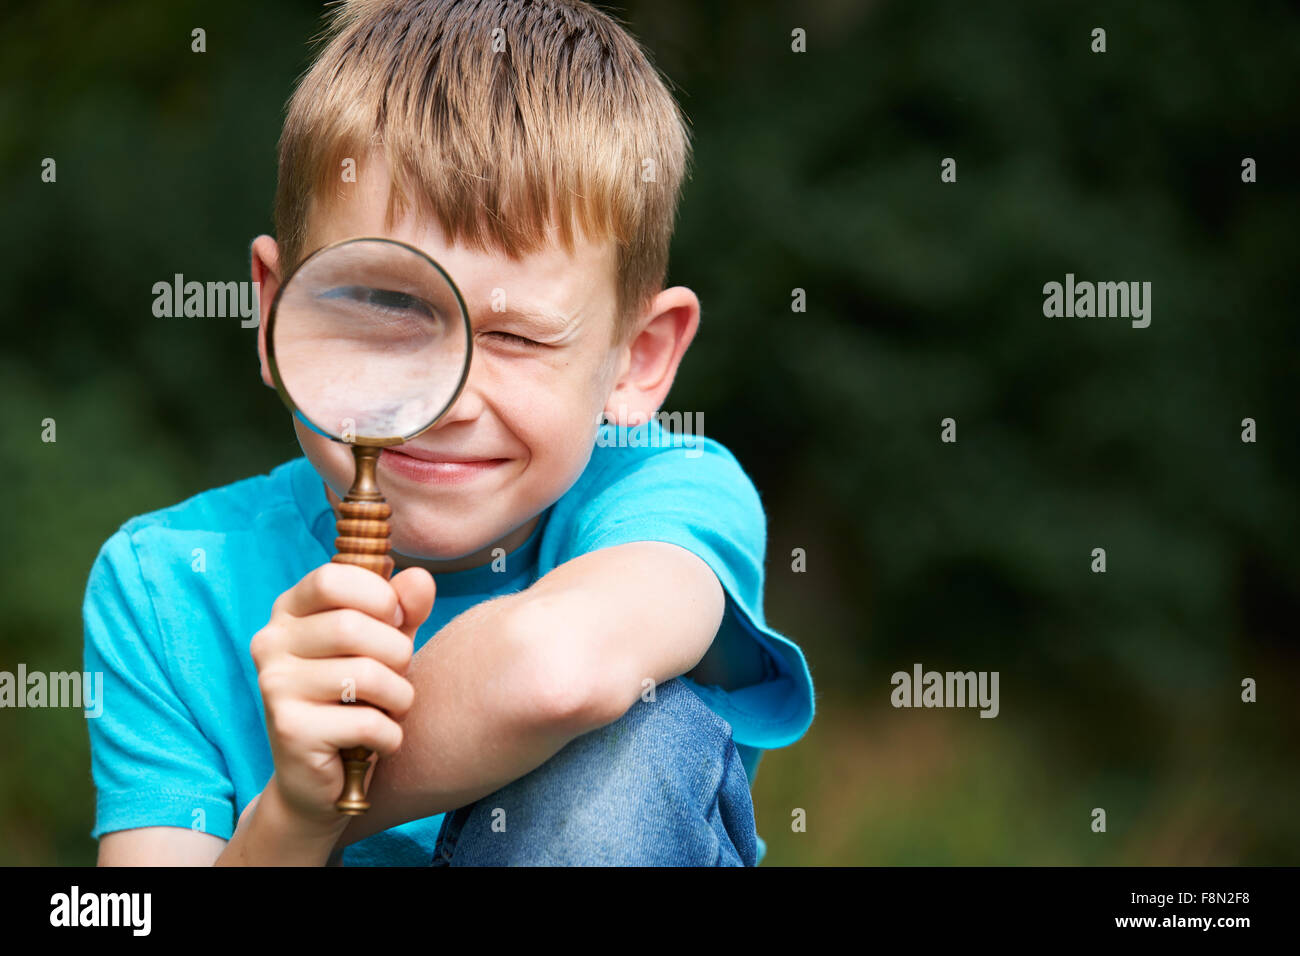 Boy Looking Through Magnifying Glass With Magnified Eye Stock Photo